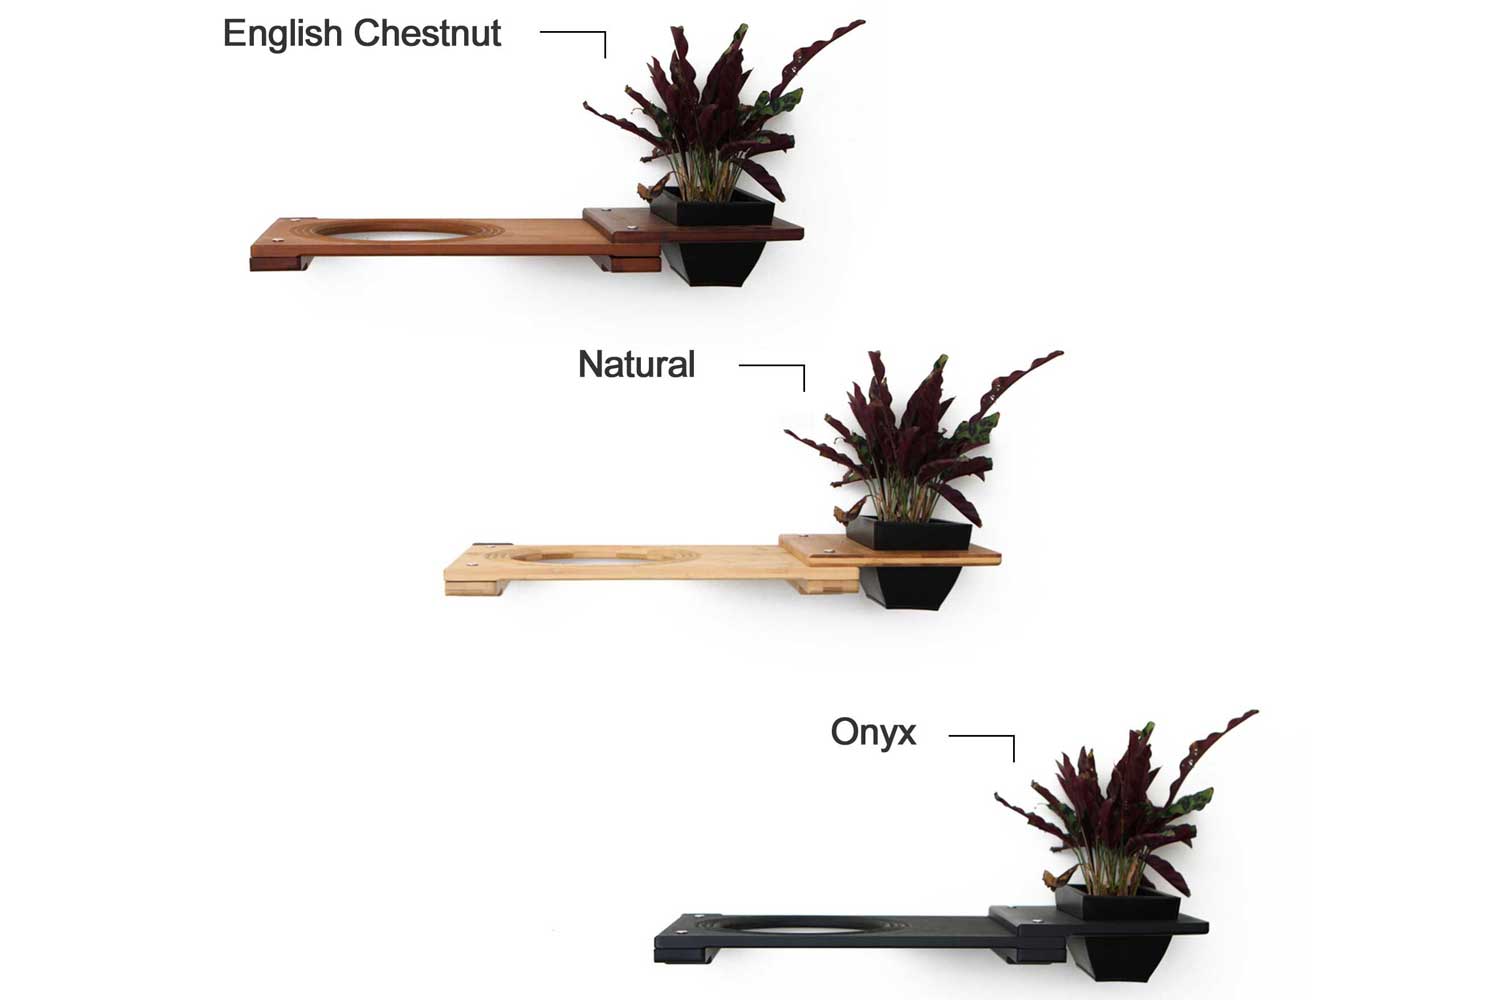 Examples of English Chestnut, Natural, and Onyx finishes available for 25" Planter Hatches.